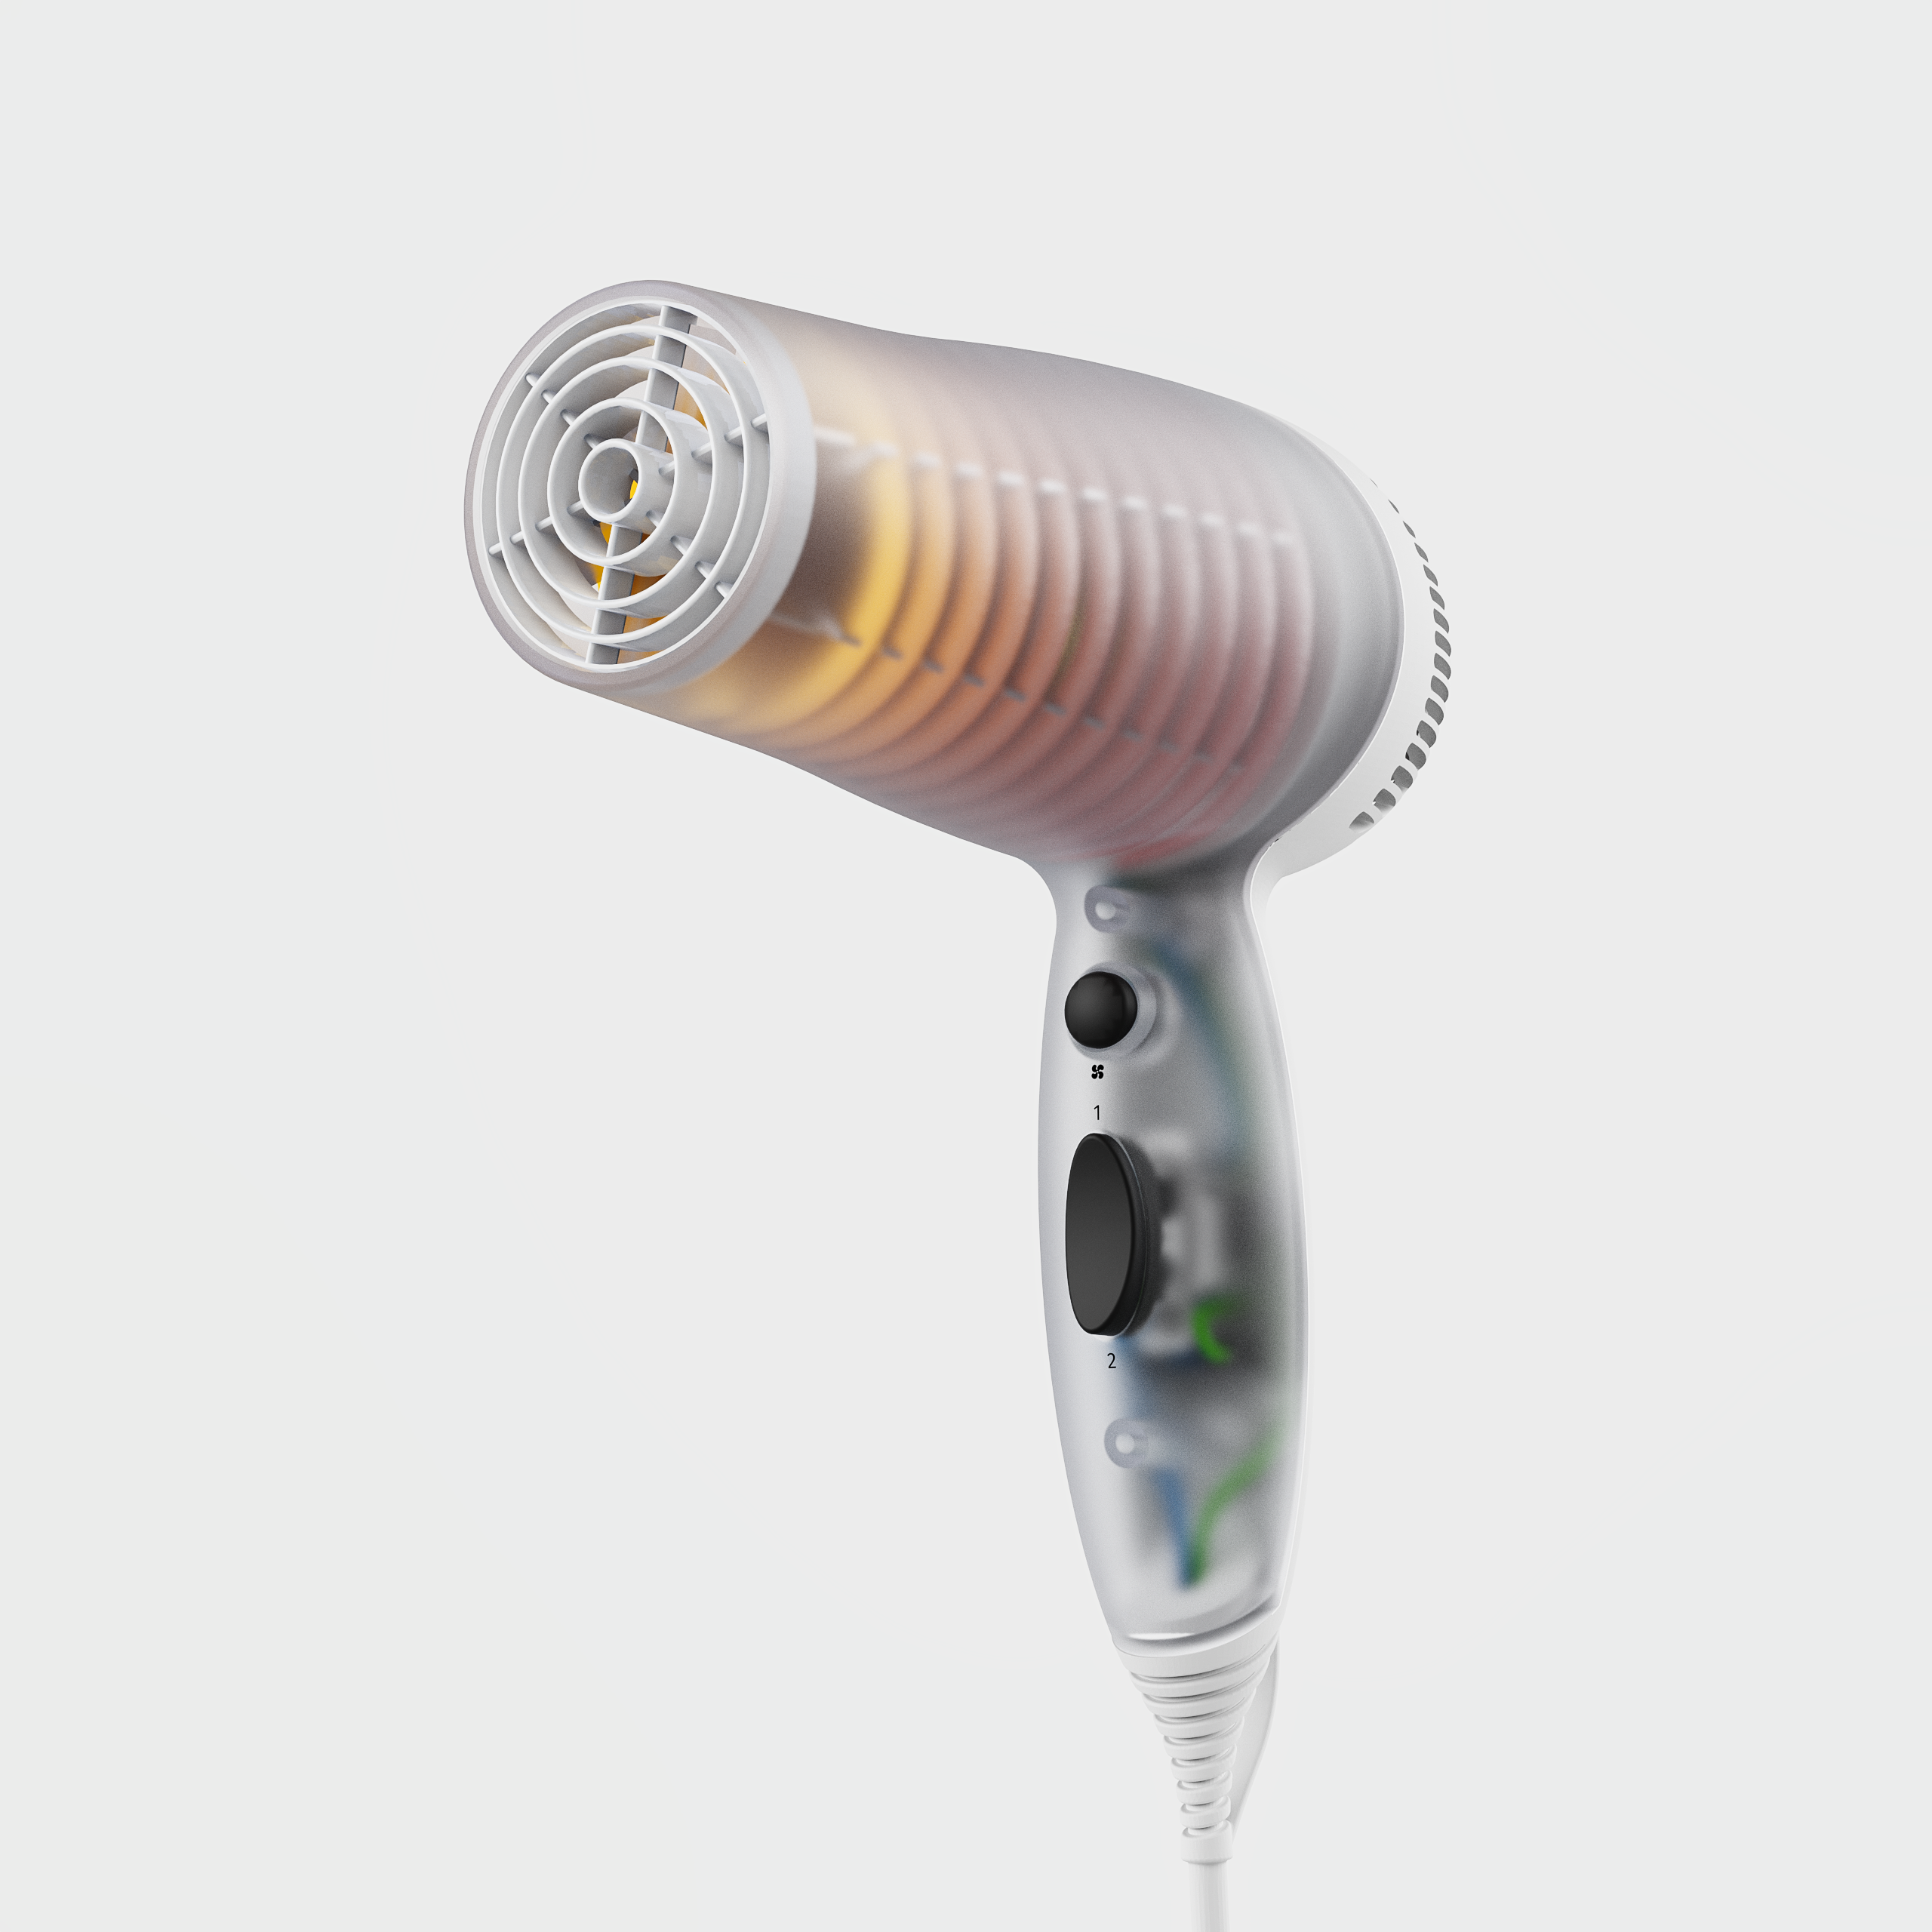 Rendering of a translucent hairdryer, plugged in